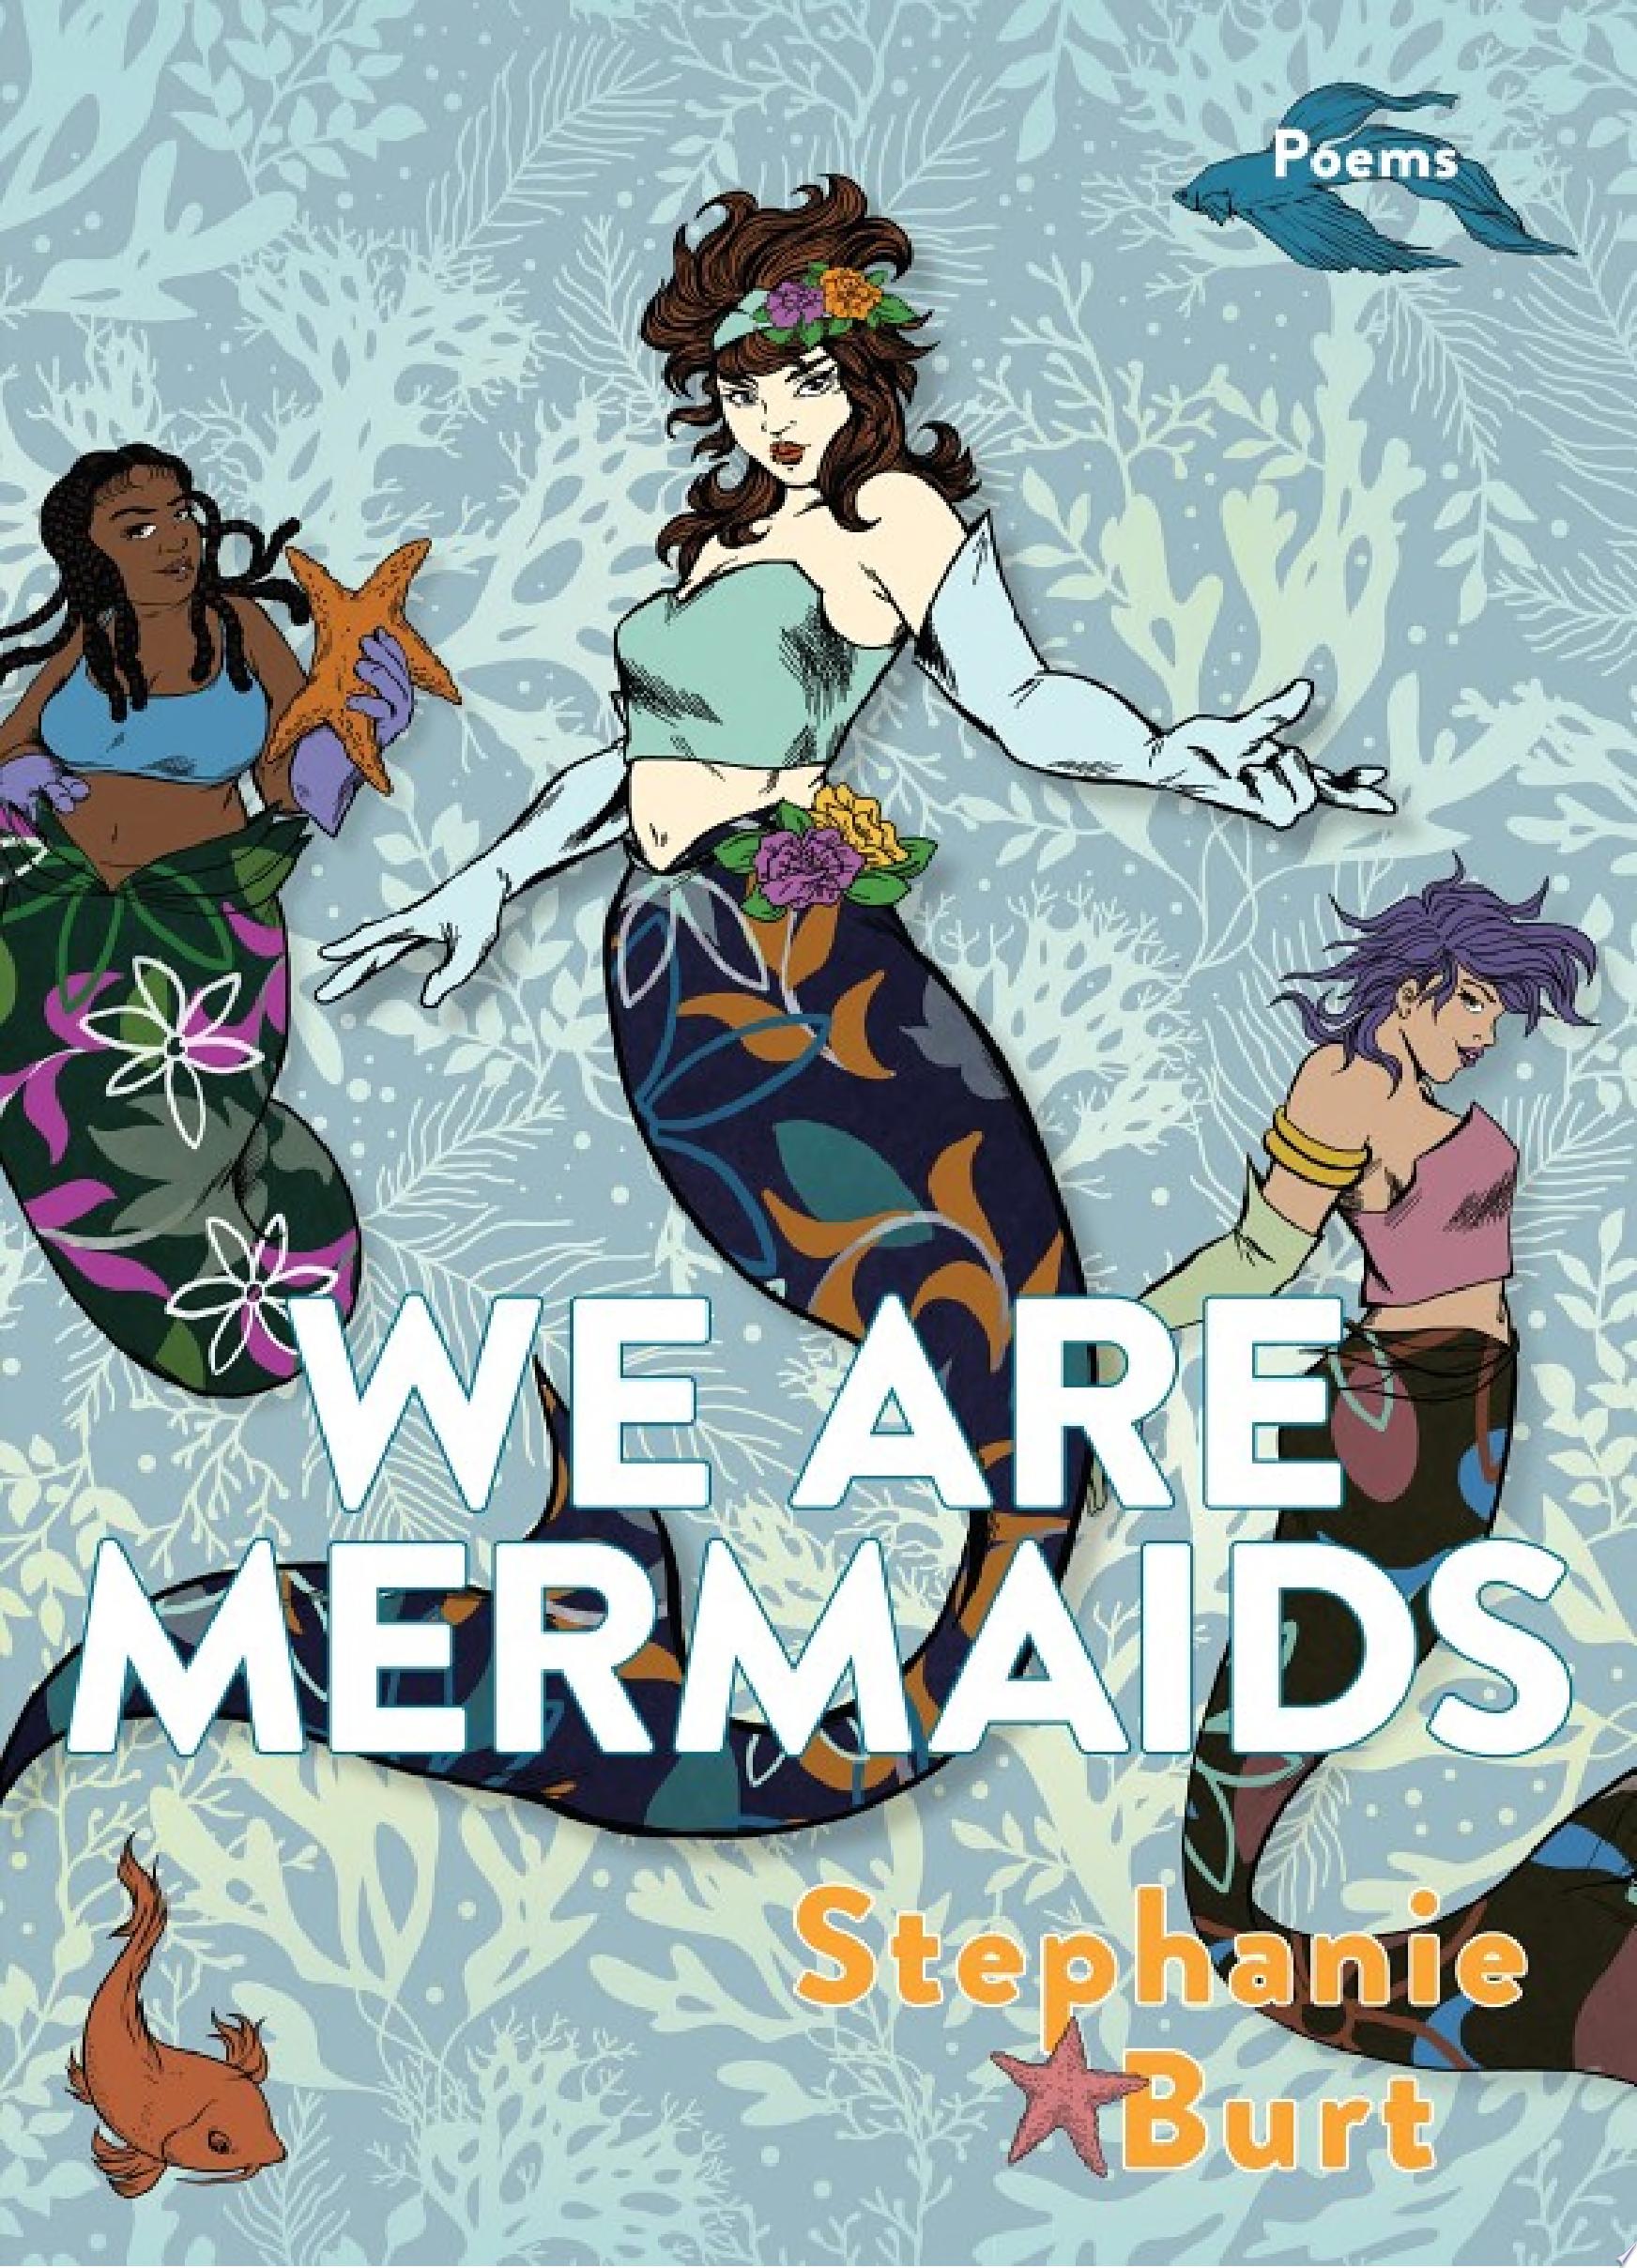 Image for "We Are Mermaids"